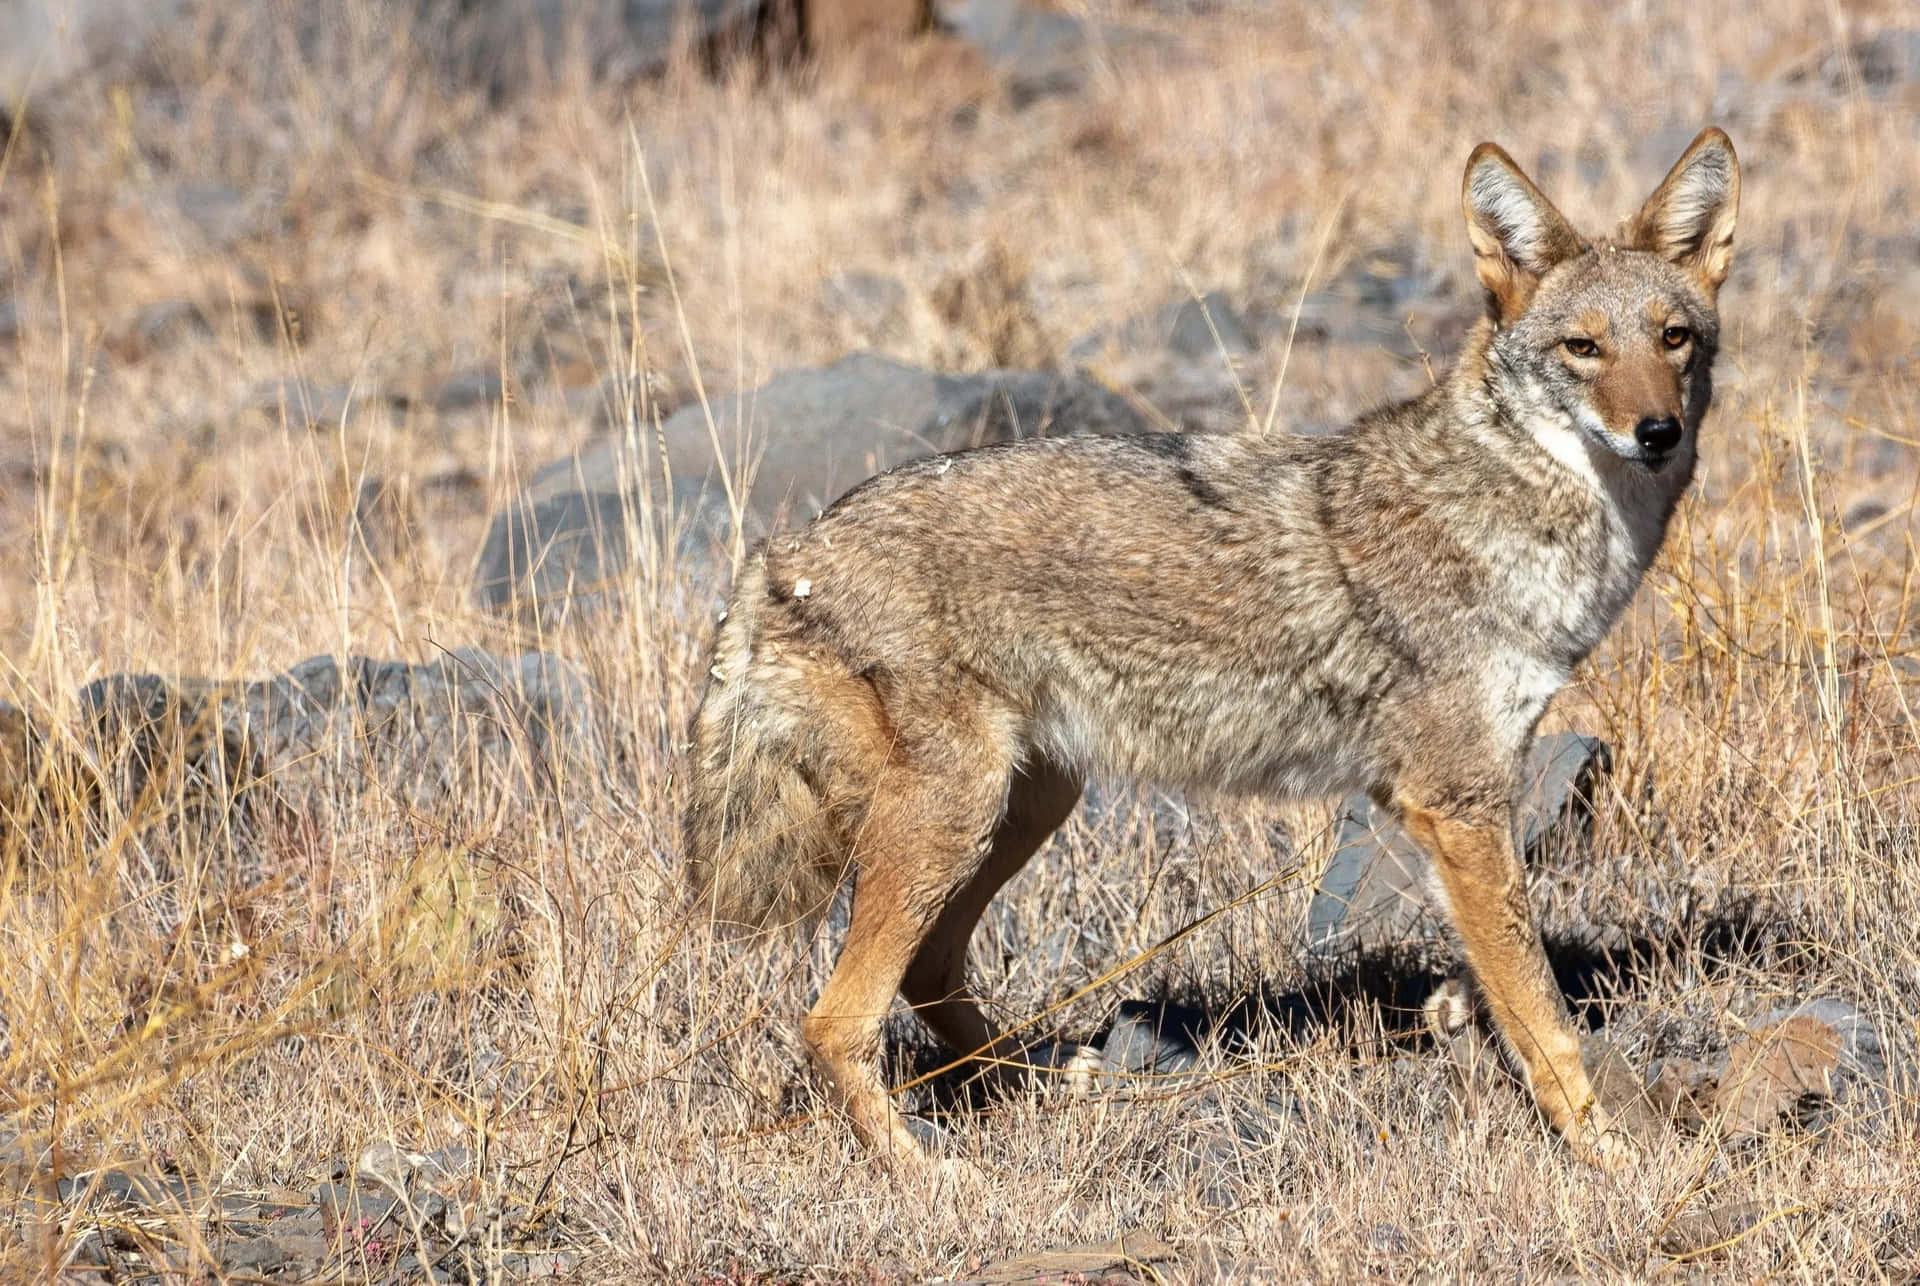 A coyote blending in with the landscape